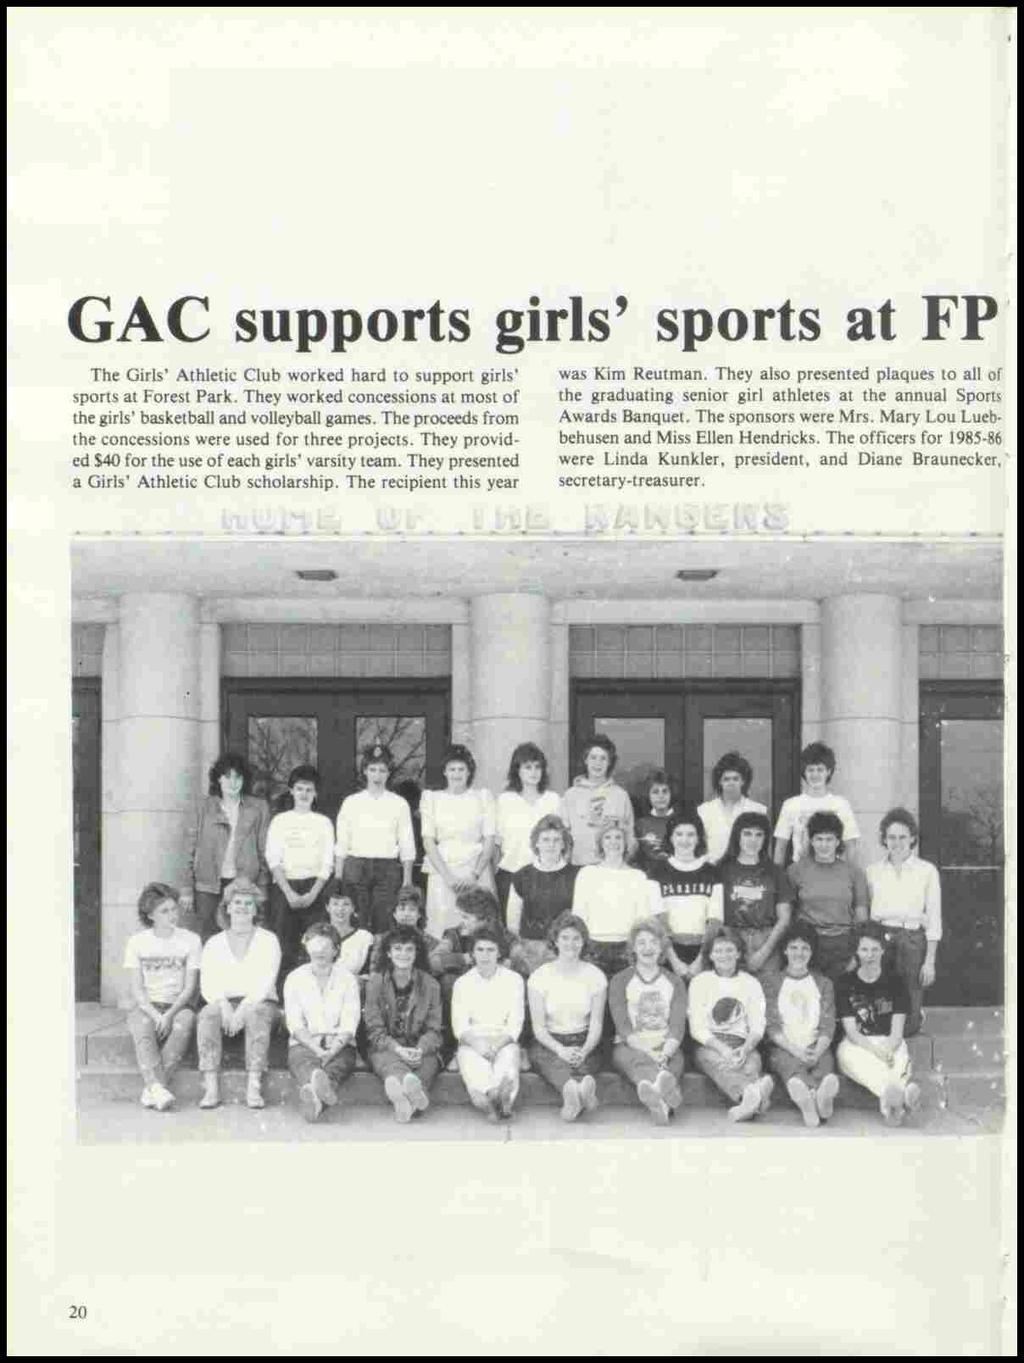 GAC supports girls' sports at FP. The Girls' Athletic Club worked hard to support girls' sports at Forest Park. They worked concessions at most of the girls' basketball and volleyball games.